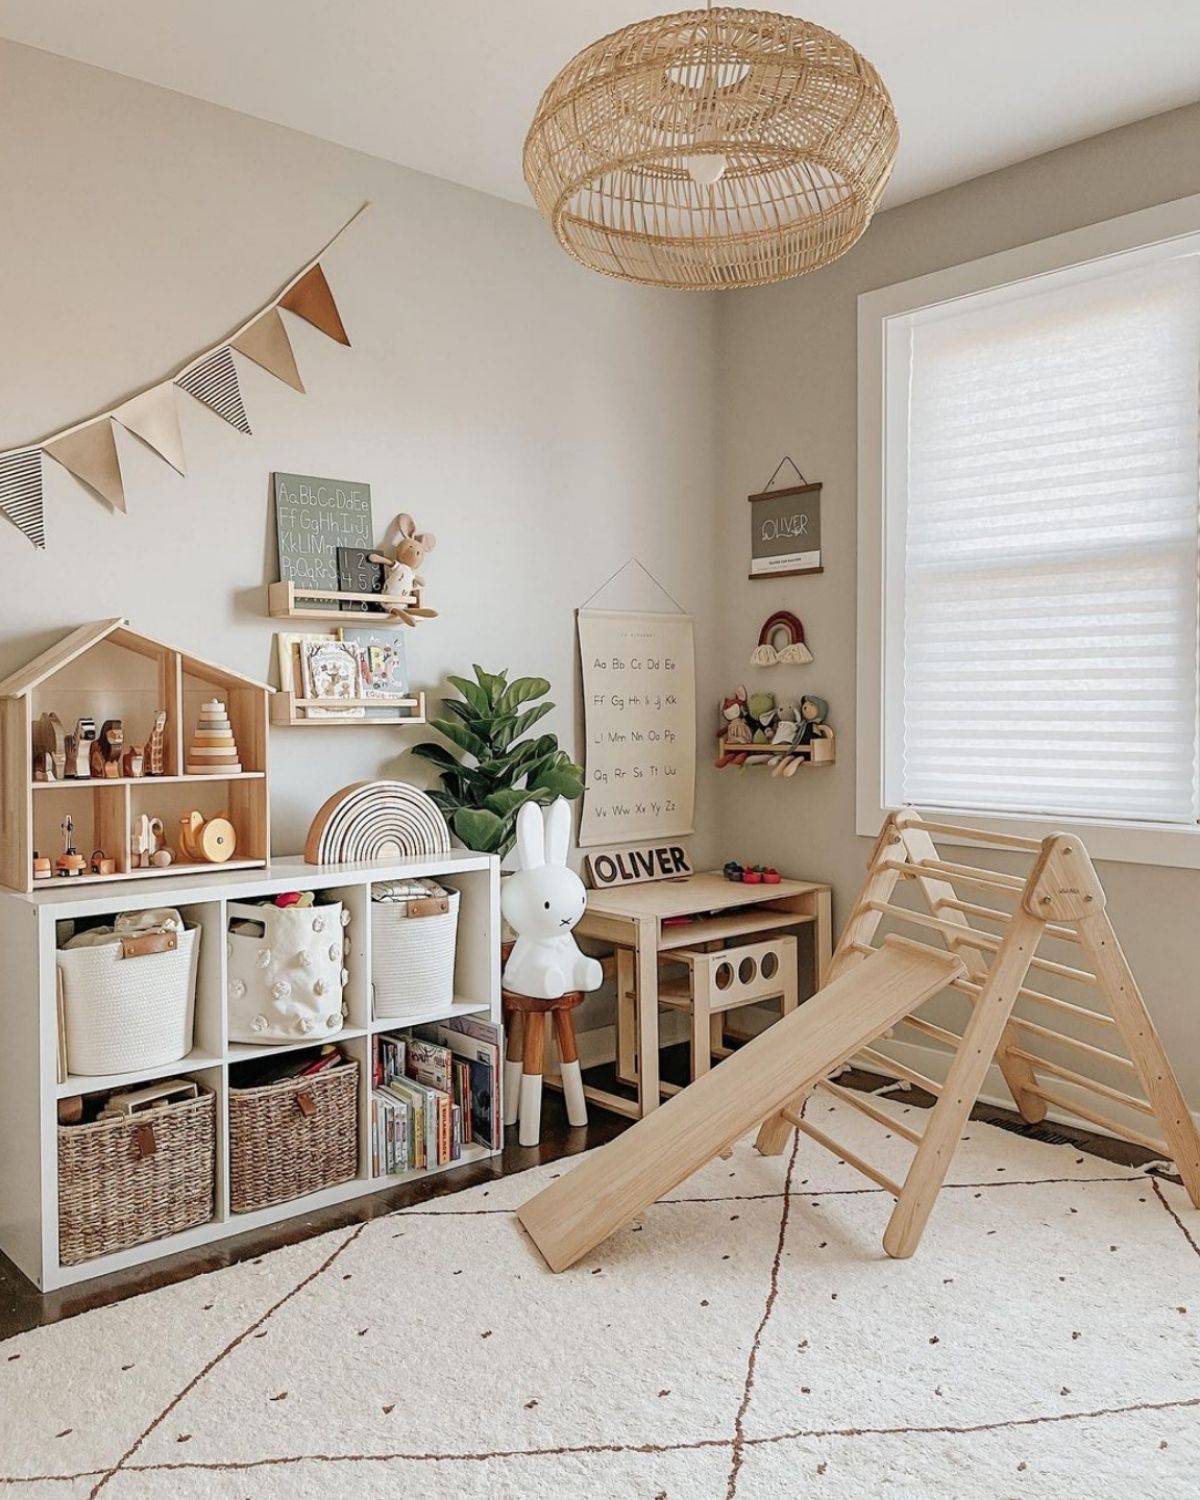 Decorate your kids room beautifully